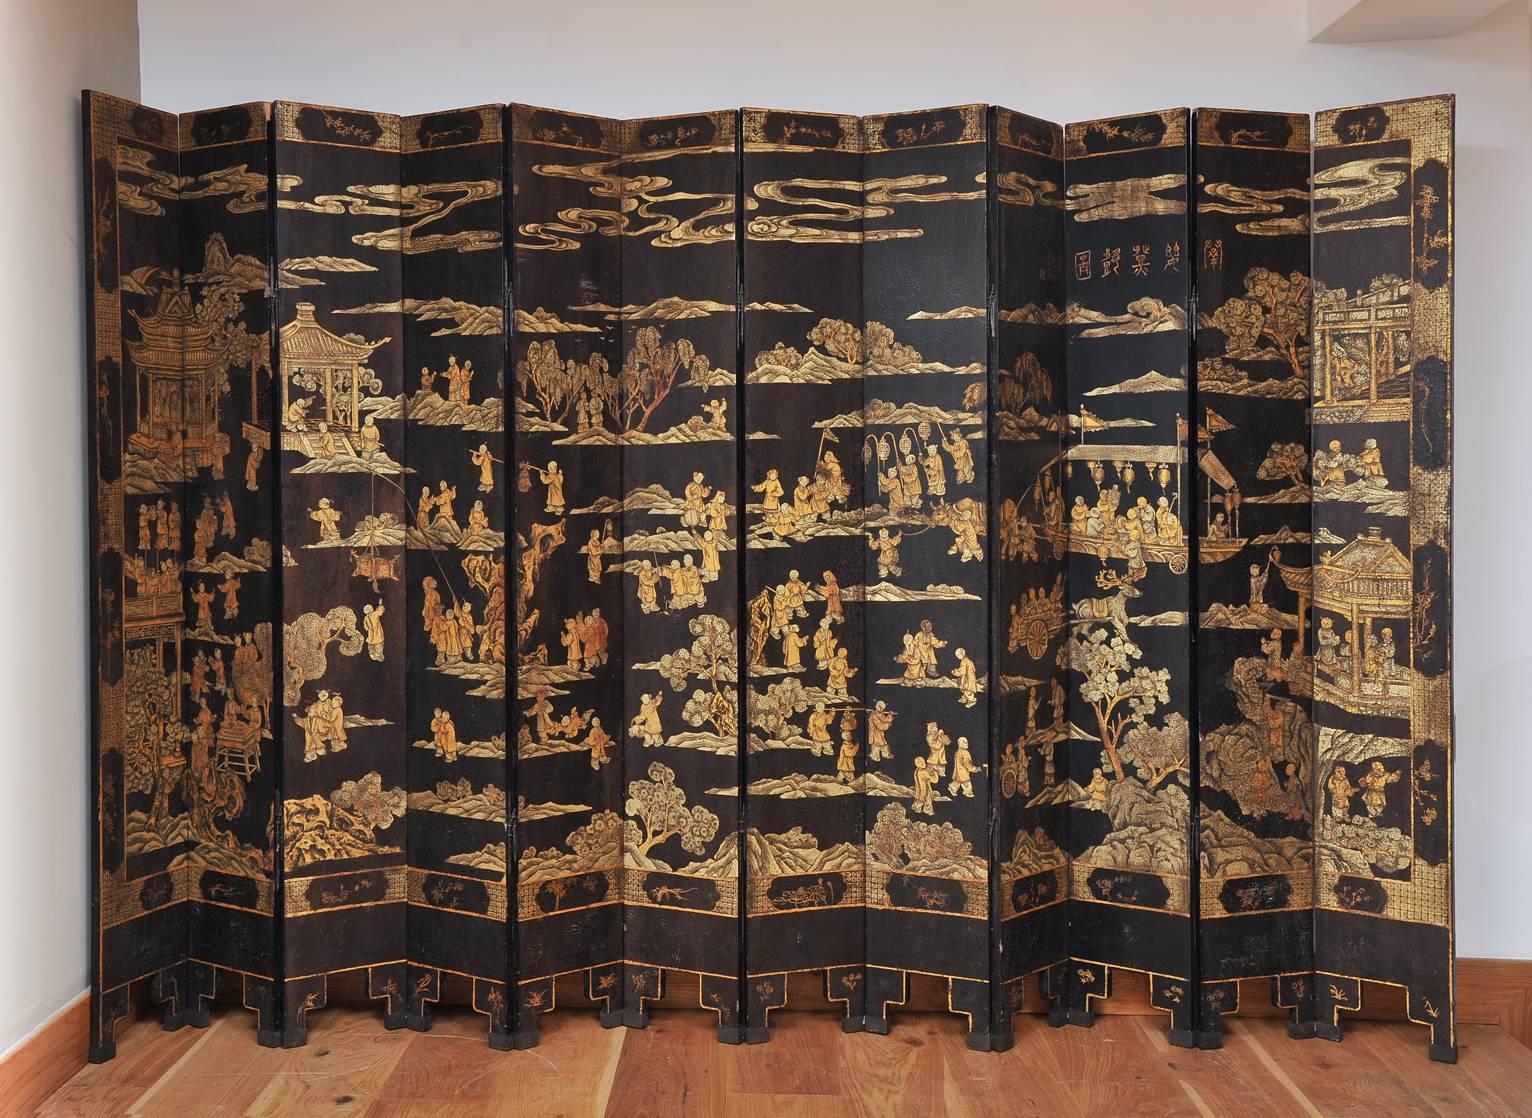 A 19th century Chinese Coromandel lacquer twelve-leaf screen, richly hand-painted with landscapes, vegetation and characters. Its reverse side presents a simpler floral and aviary design.
China, Qing Dynasty, circa 1880.
The height is 214 cm, and